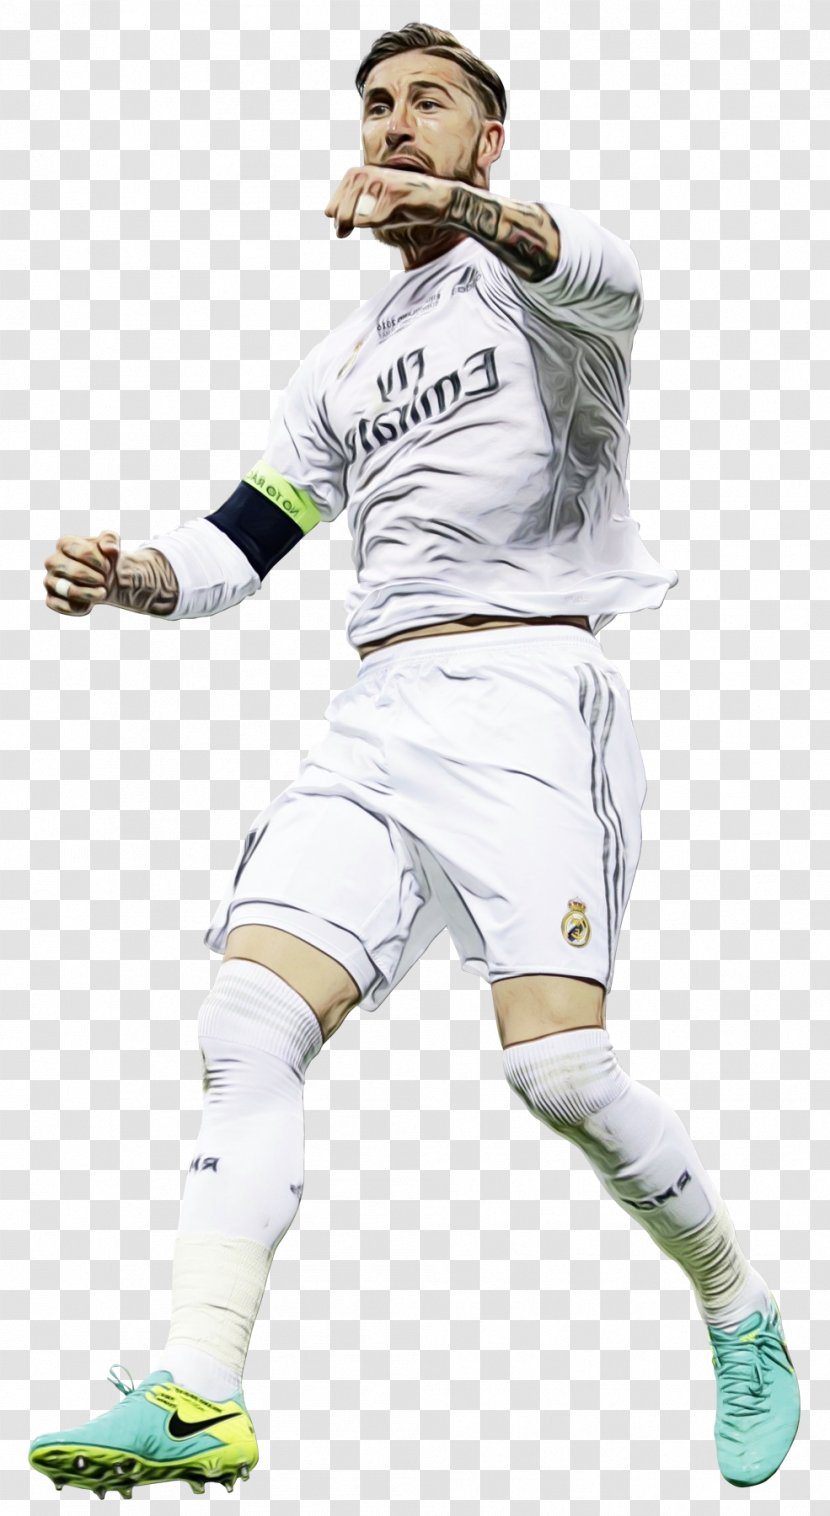 Football Background - Paint - Soccer Player Softball Transparent PNG